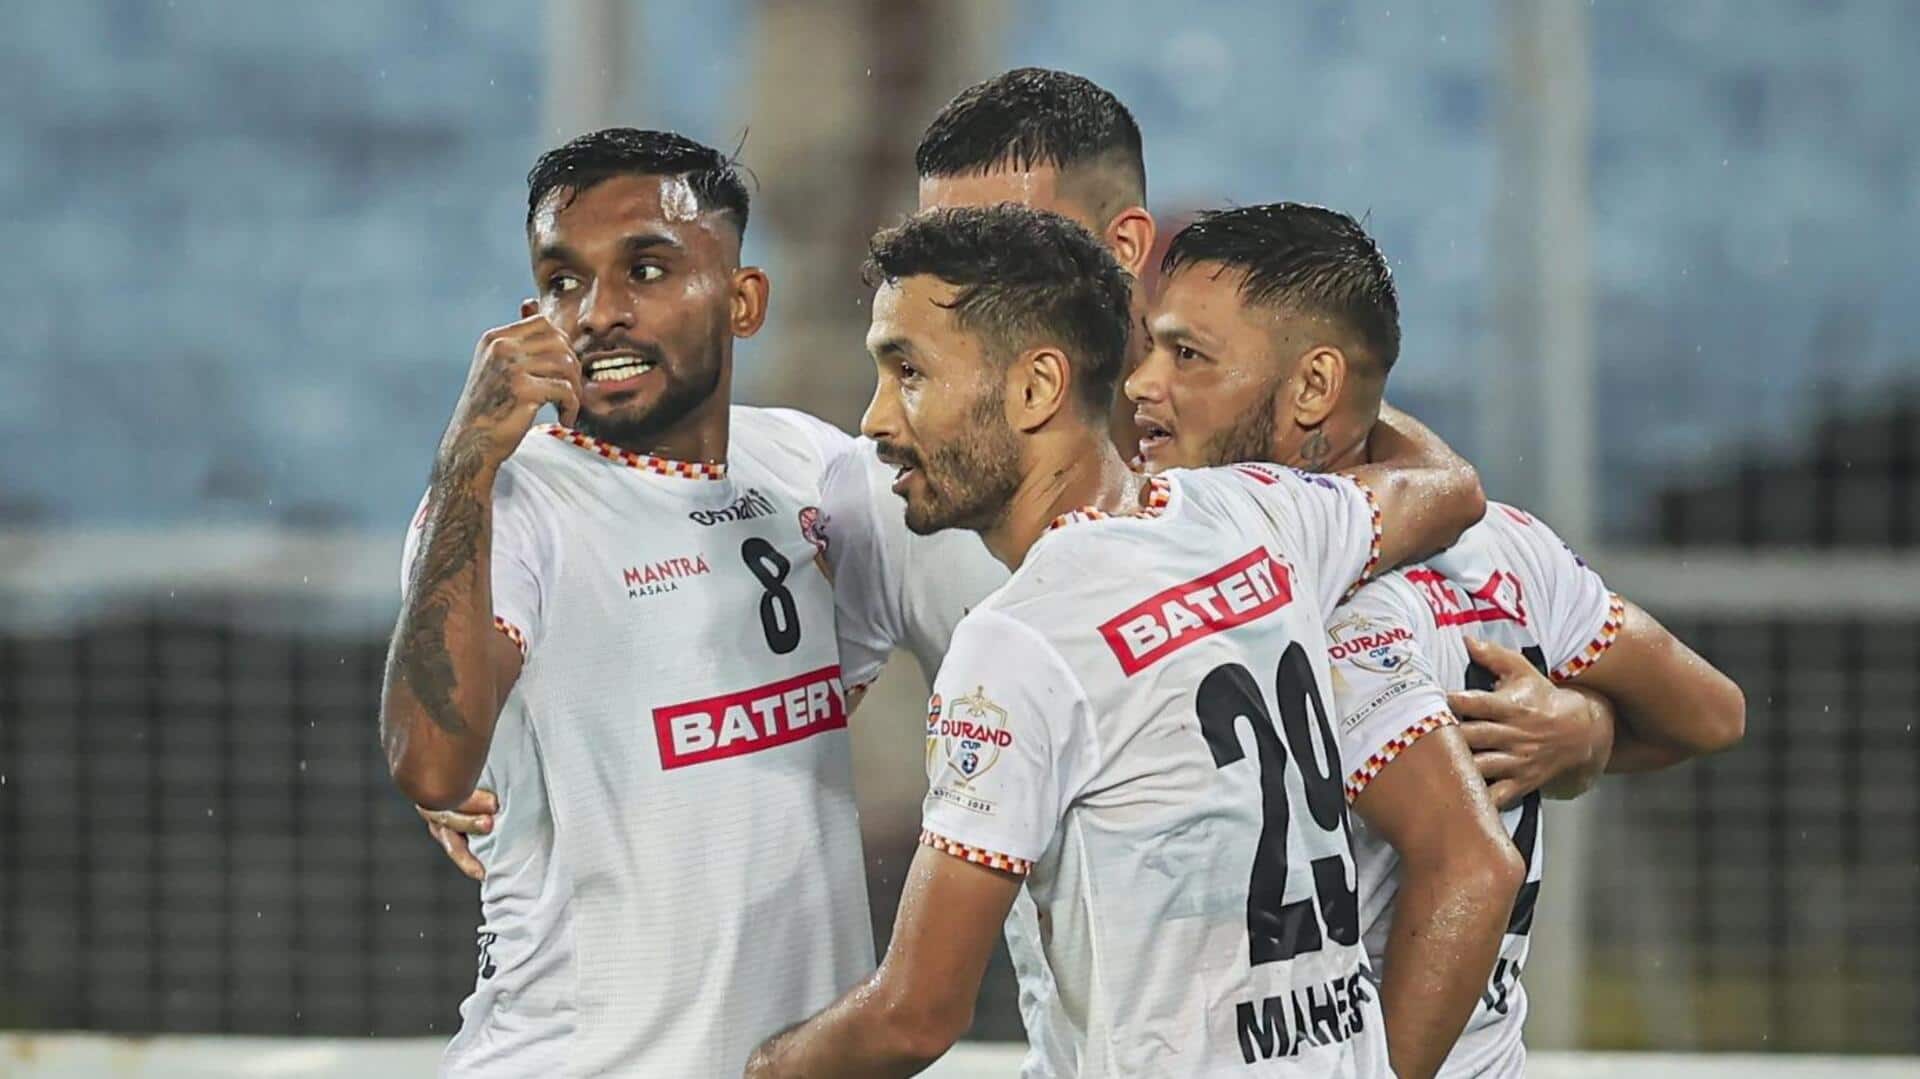 Durand Cup semi-finals: Dominant East Bengal take on spirited NEUFC